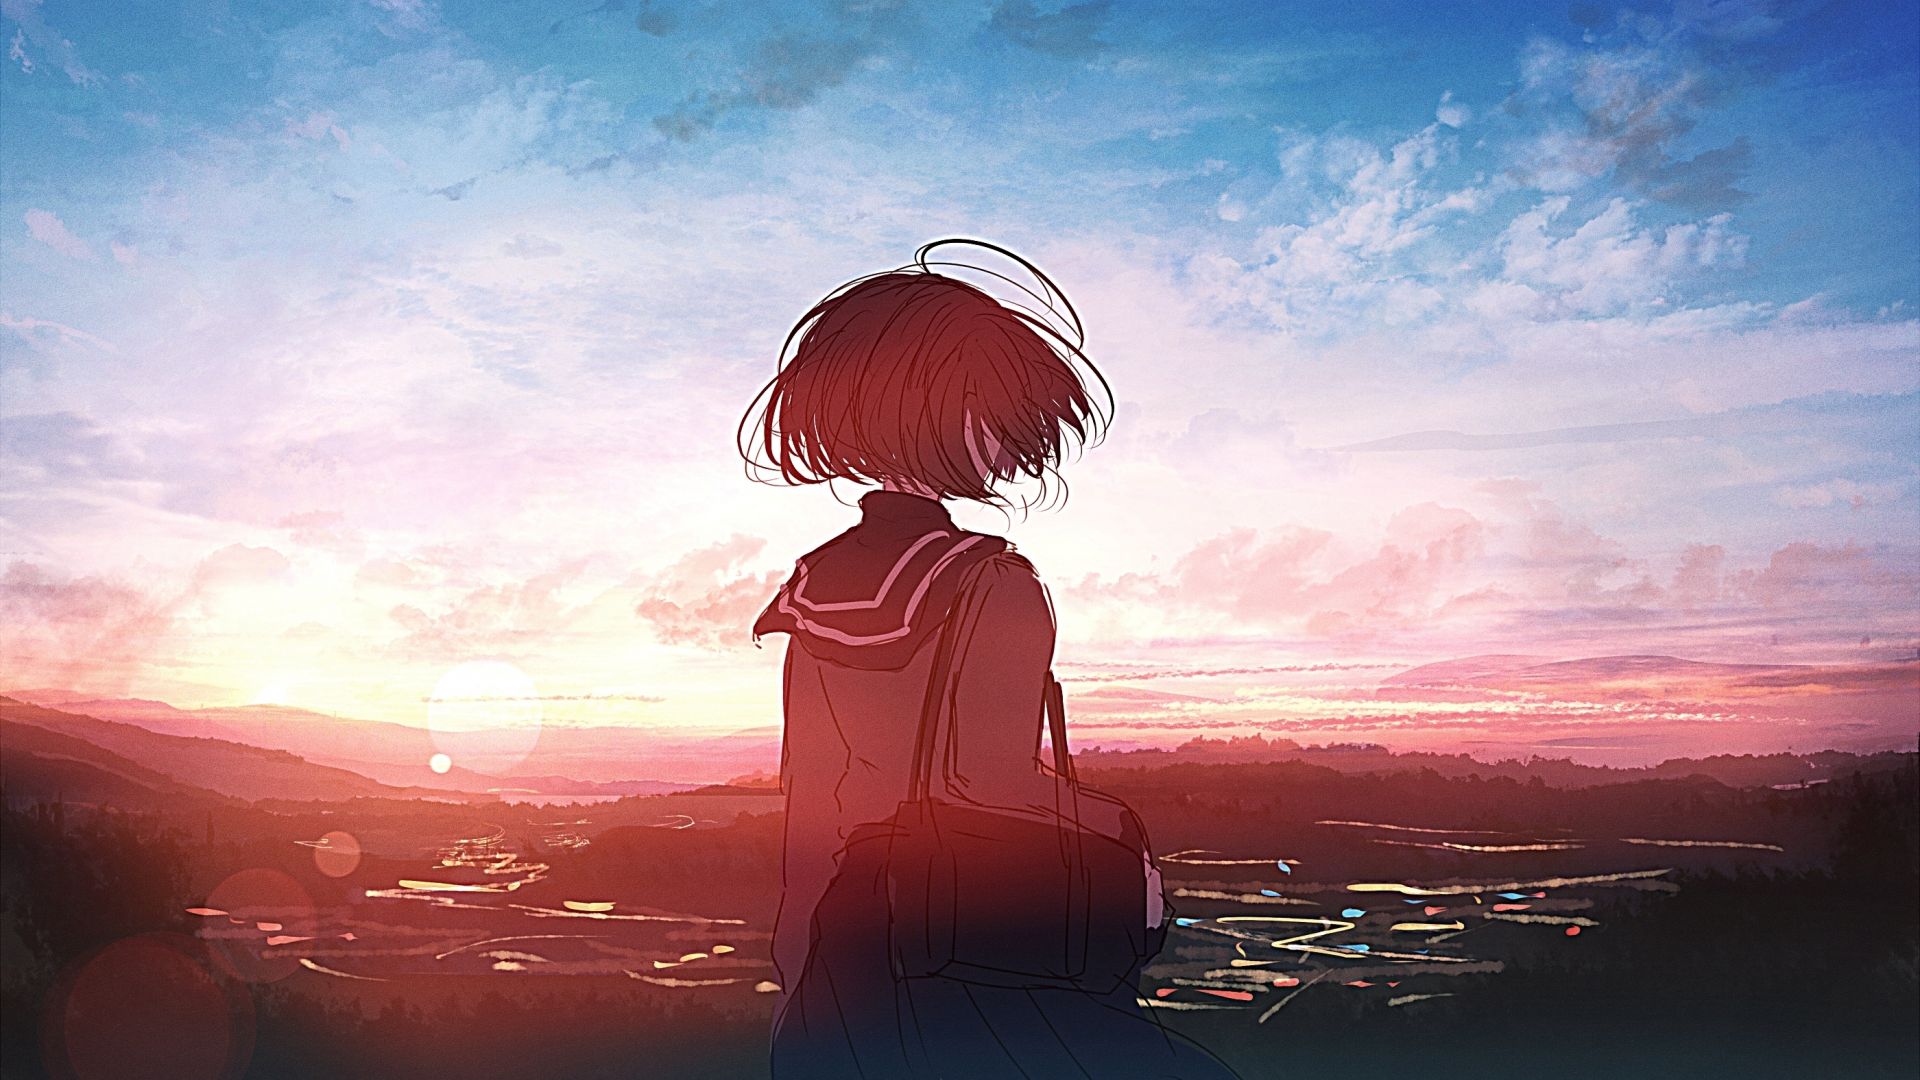 Cute Anime Girl Sunset Draw Wallpapers